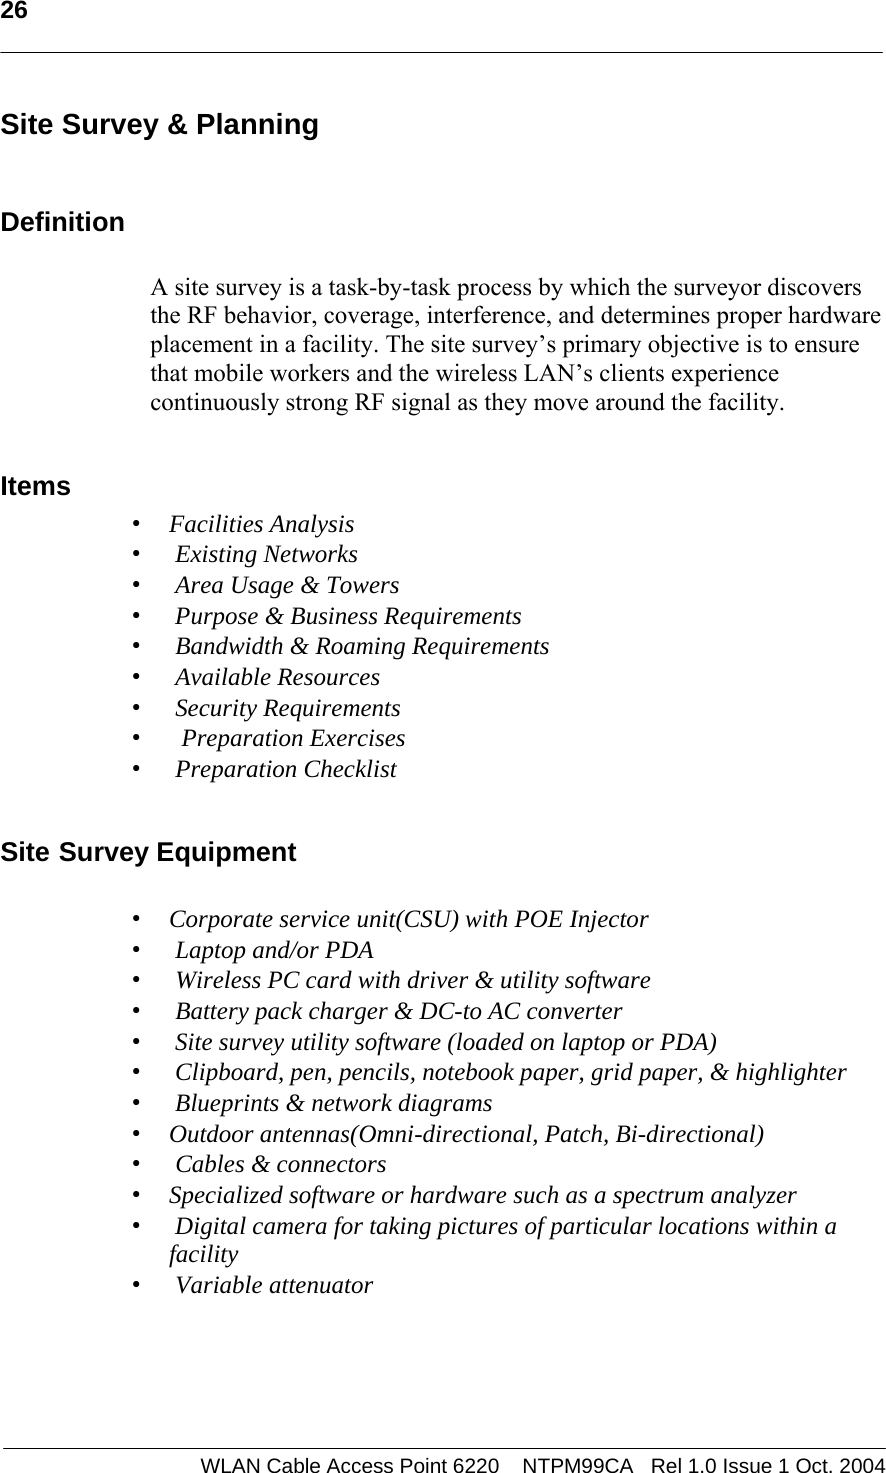   26   Site Survey &amp; Planning  Definition  A site survey is a task-by-task process by which the surveyor discovers the RF behavior, coverage, interference, and determines proper hardware placement in a facility. The site survey’s primary objective is to ensure that mobile workers and the wireless LAN’s clients experience continuously strong RF signal as they move around the facility.   Items  • Facilities Analysis •  Existing Networks •  Area Usage &amp; Towers •  Purpose &amp; Business Requirements •  Bandwidth &amp; Roaming Requirements •  Available Resources •  Security Requirements •   Preparation Exercises •  Preparation Checklist  Site Survey Equipment  • Corporate service unit(CSU) with POE Injector •  Laptop and/or PDA •  Wireless PC card with driver &amp; utility software •  Battery pack charger &amp; DC-to AC converter •  Site survey utility software (loaded on laptop or PDA) •  Clipboard, pen, pencils, notebook paper, grid paper, &amp; highlighter •  Blueprints &amp; network diagrams • Outdoor antennas(Omni-directional, Patch, Bi-directional) •  Cables &amp; connectors • Specialized software or hardware such as a spectrum analyzer •  Digital camera for taking pictures of particular locations within a facility •  Variable attenuator     WLAN Cable Access Point 6220    NTPM99CA   Rel 1.0 Issue 1 Oct. 2004